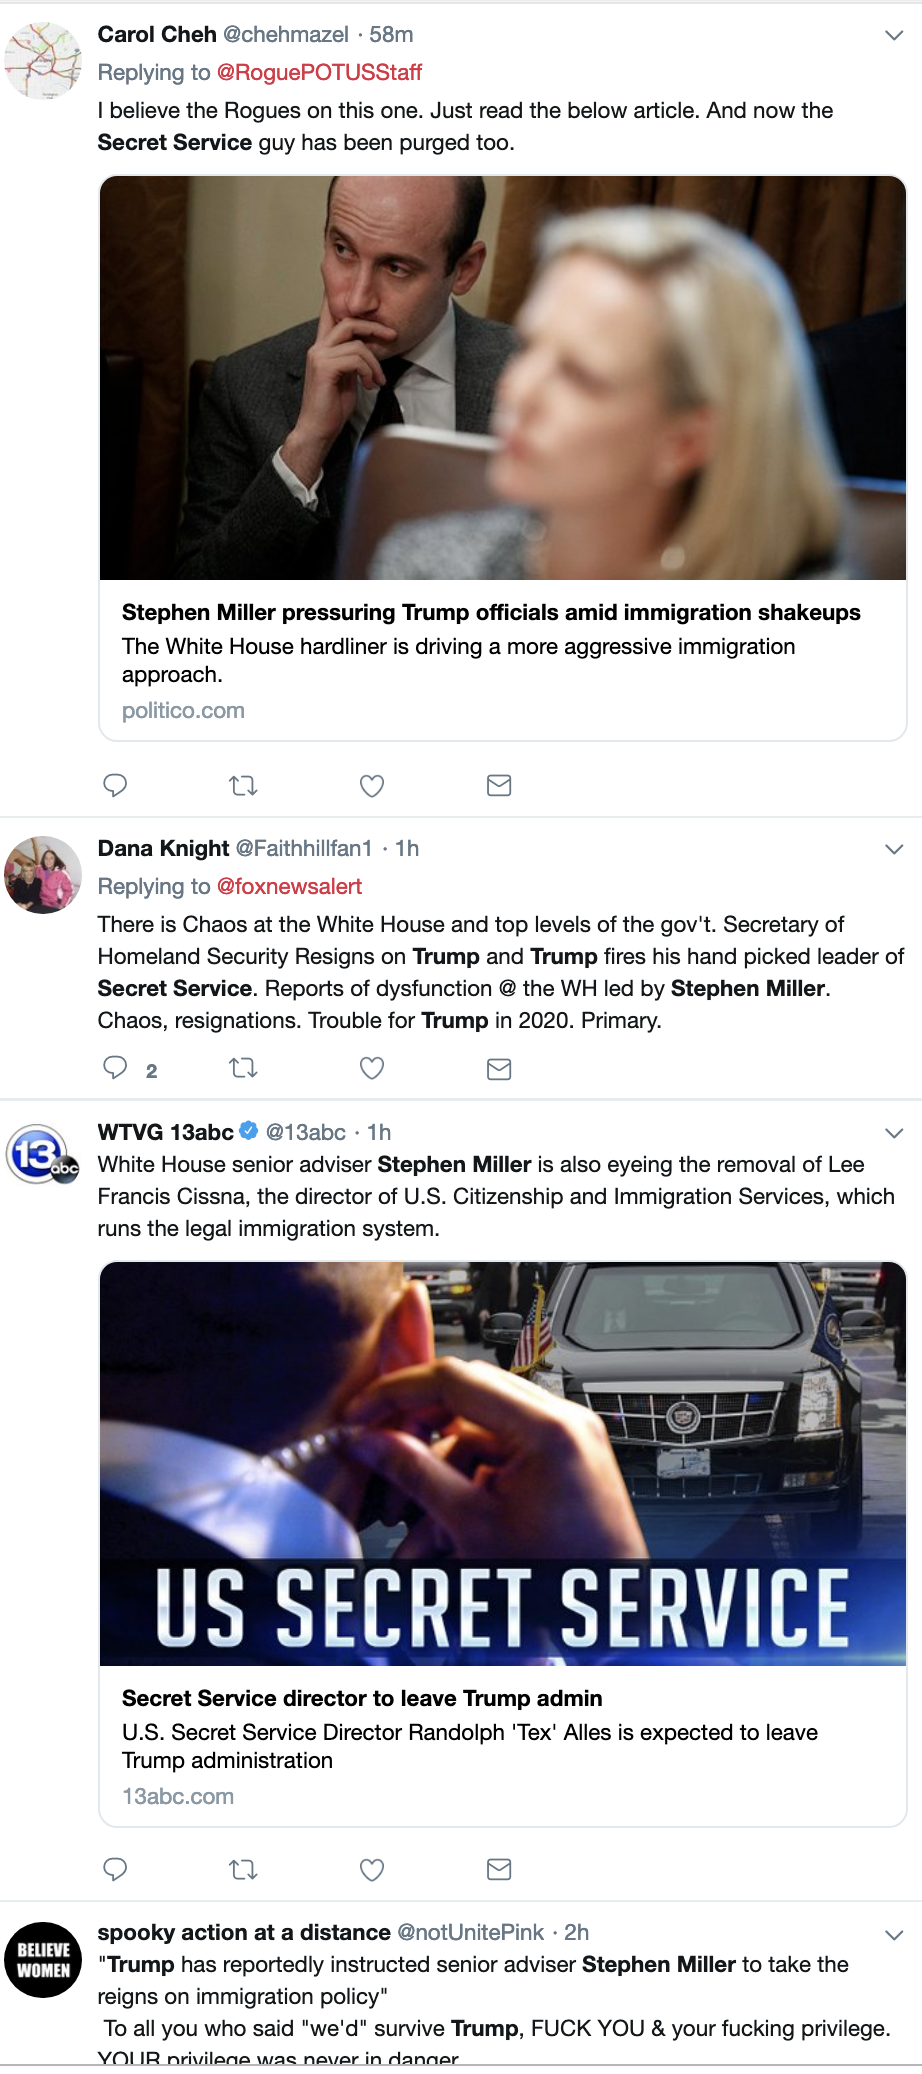 Screen-Shot-2019-04-08-at-3.00.24-PM Trump Orders Acting Chief Of Staff To Fire Secret Service Chief ASAP Corruption Crime Domestic Policy Donald Trump National Security Politics Racism Refugees Top Stories 